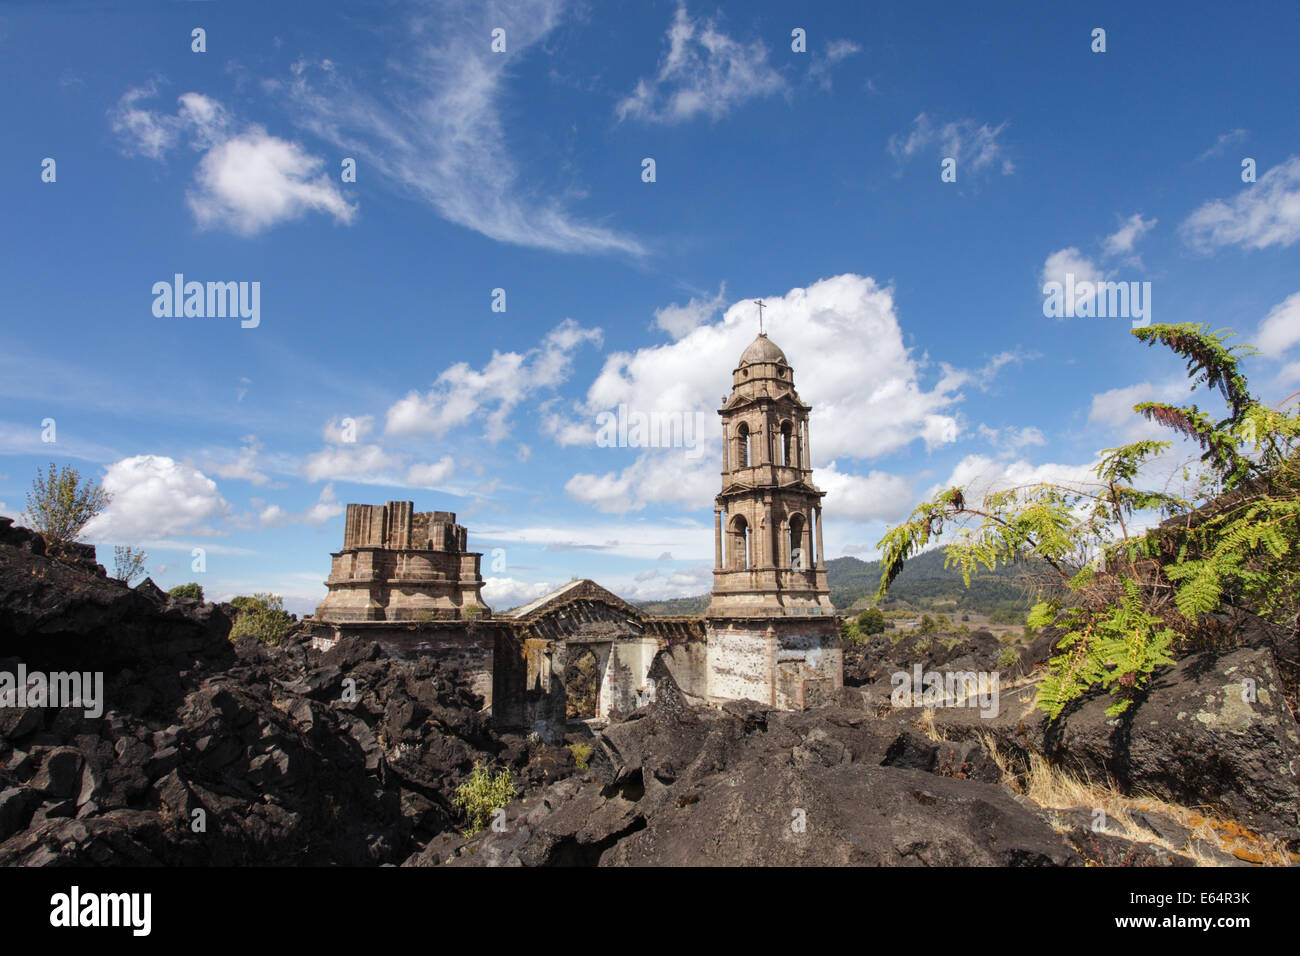 The towers of the temple are all that remain of the village covered by lava from the Paricutin volcano, Michoacan, Mexico. Stock Photo